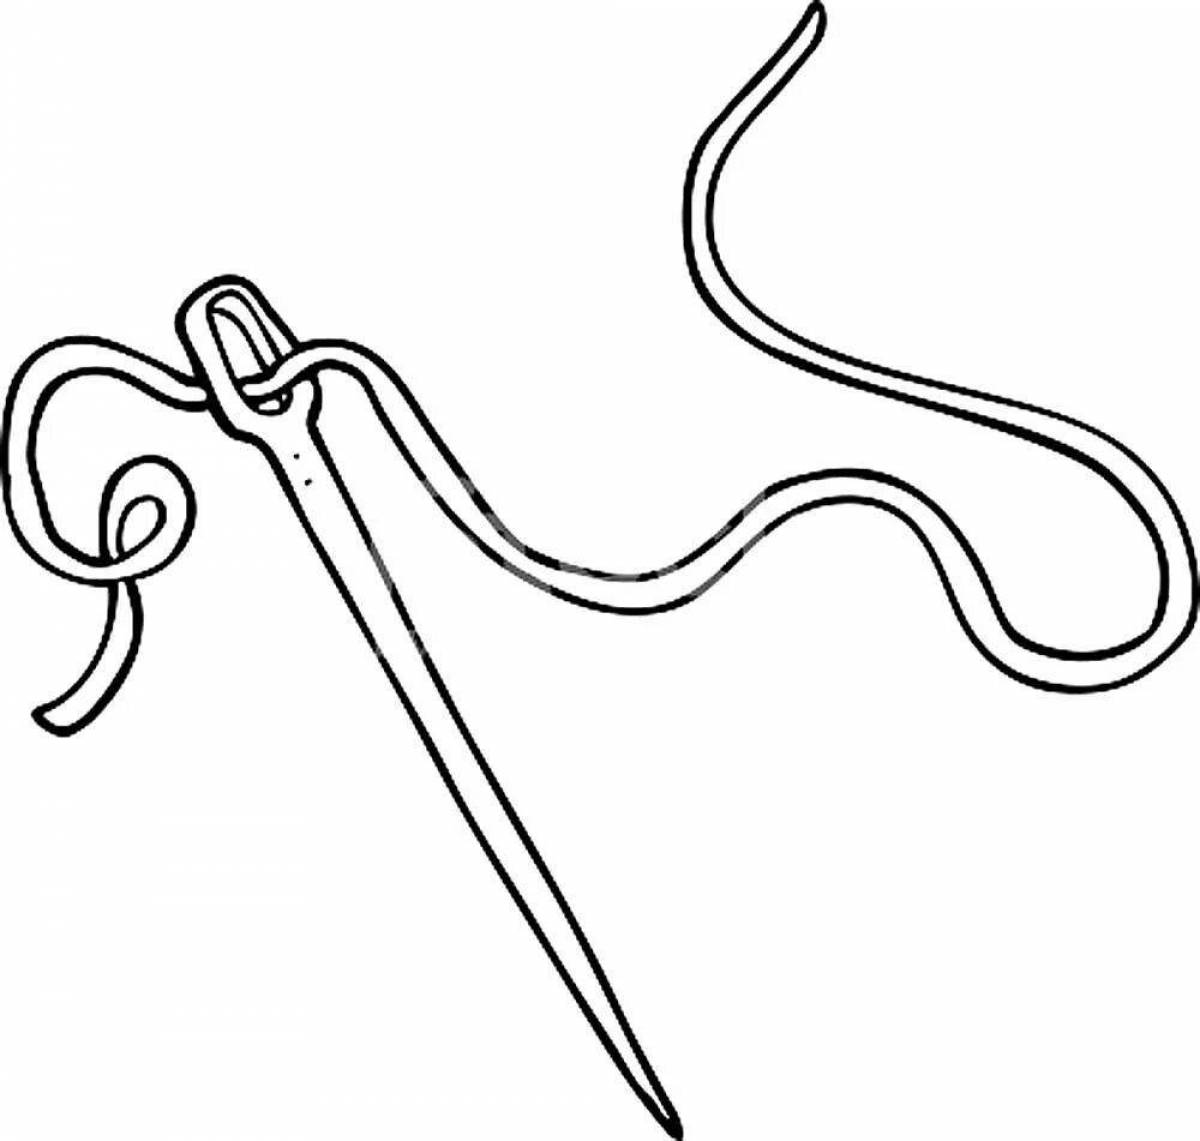 Playful juvenile needles coloring page